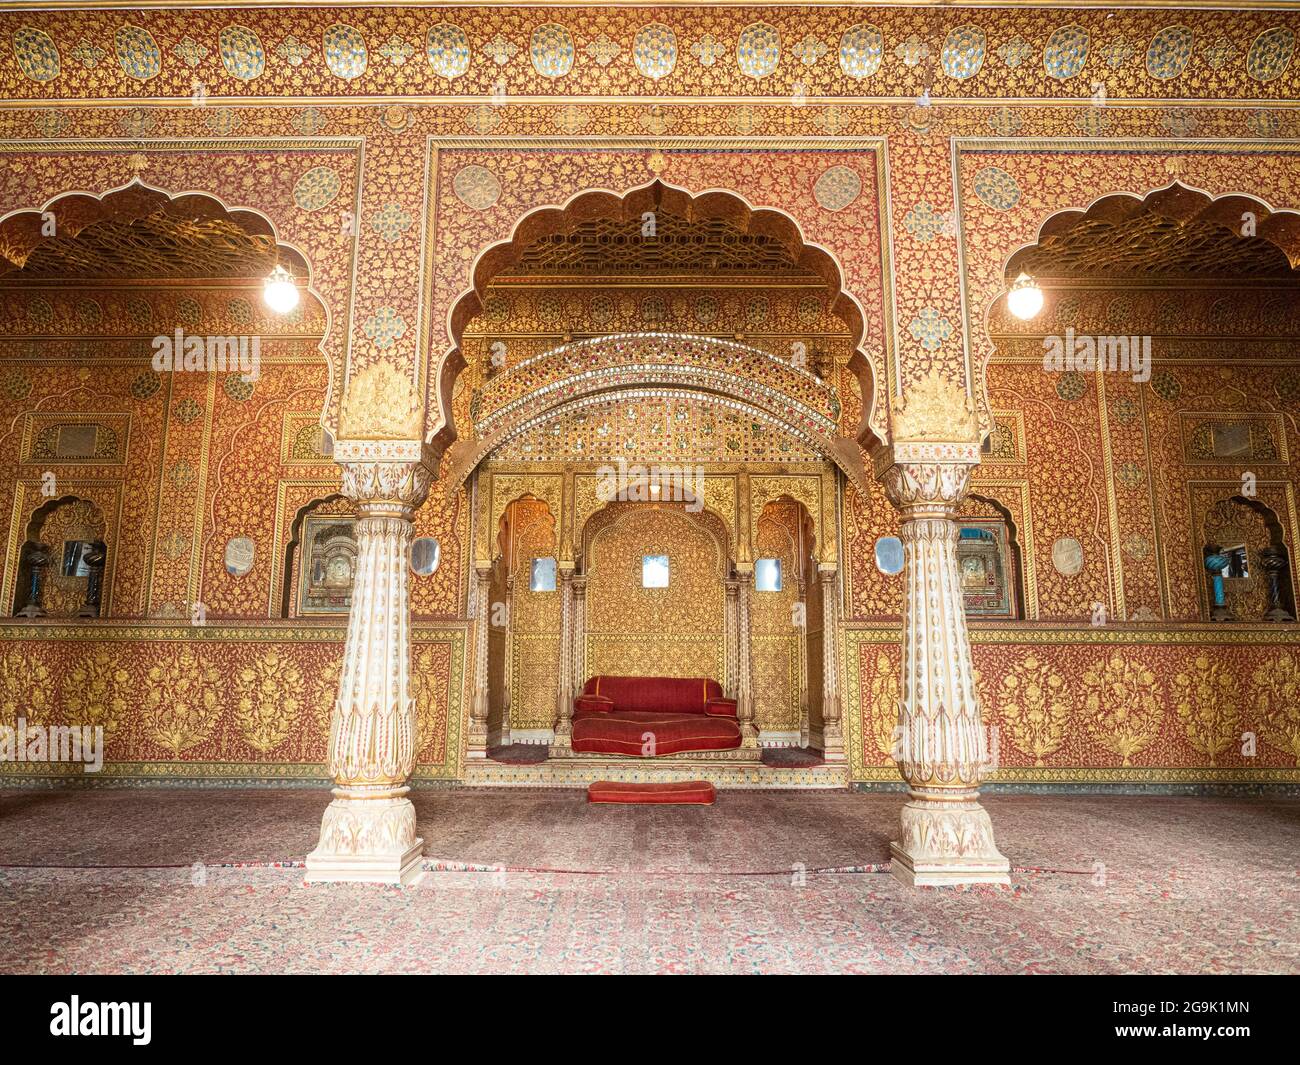 Private audience hall, Anup Mahal, with seating niche for the Maharaja, City Palace of Bikaner, Junagarh Fort, Rajasthan, India Stock Photo